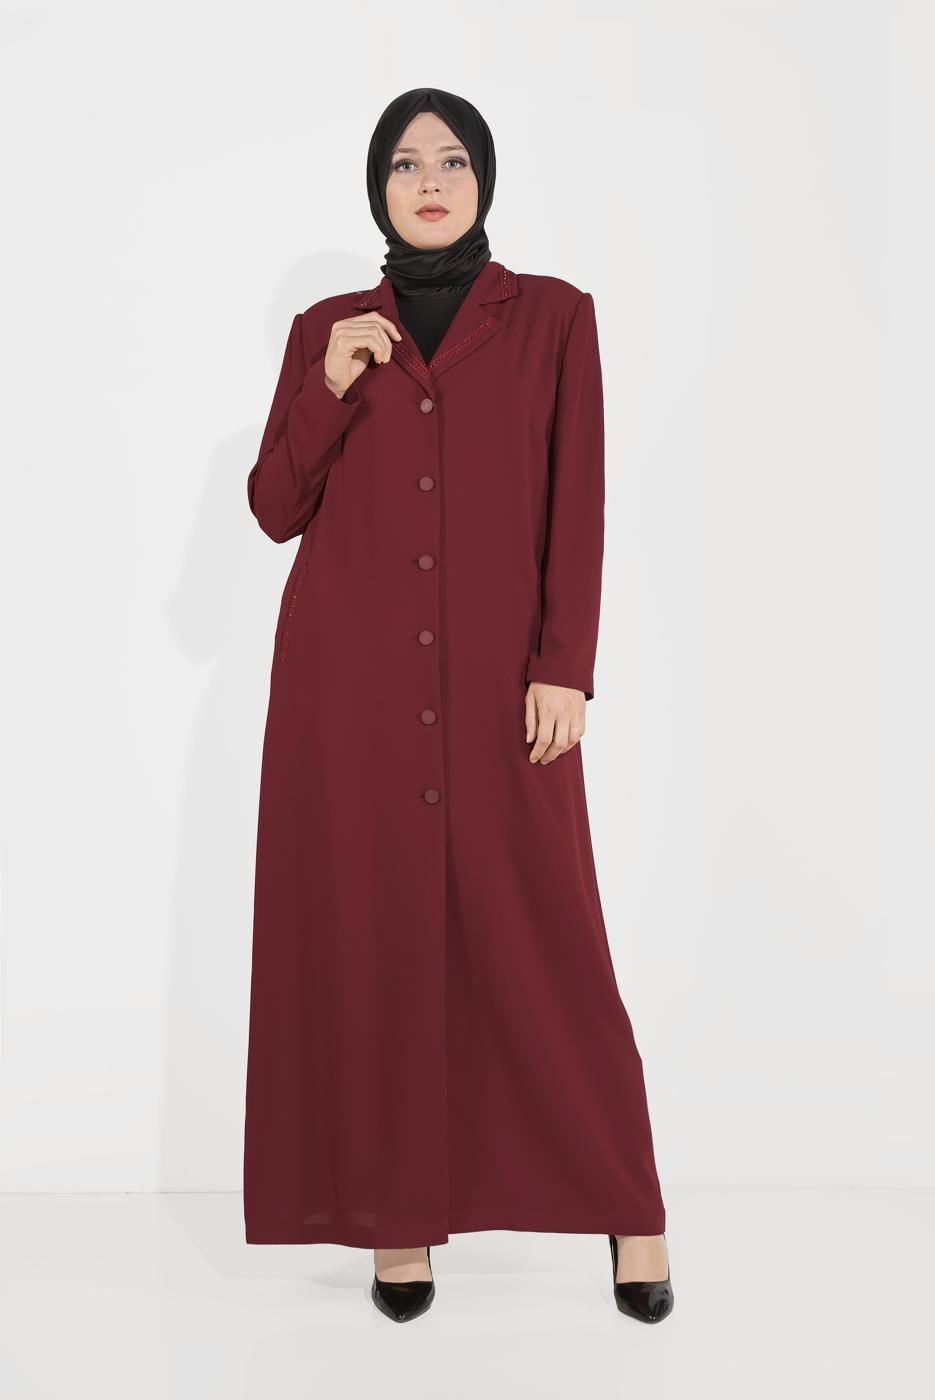 Female CLARET RED ALVİNA EMBROIDERY DETAIL CLASSIC COLLAR TOPCOAT 10222 